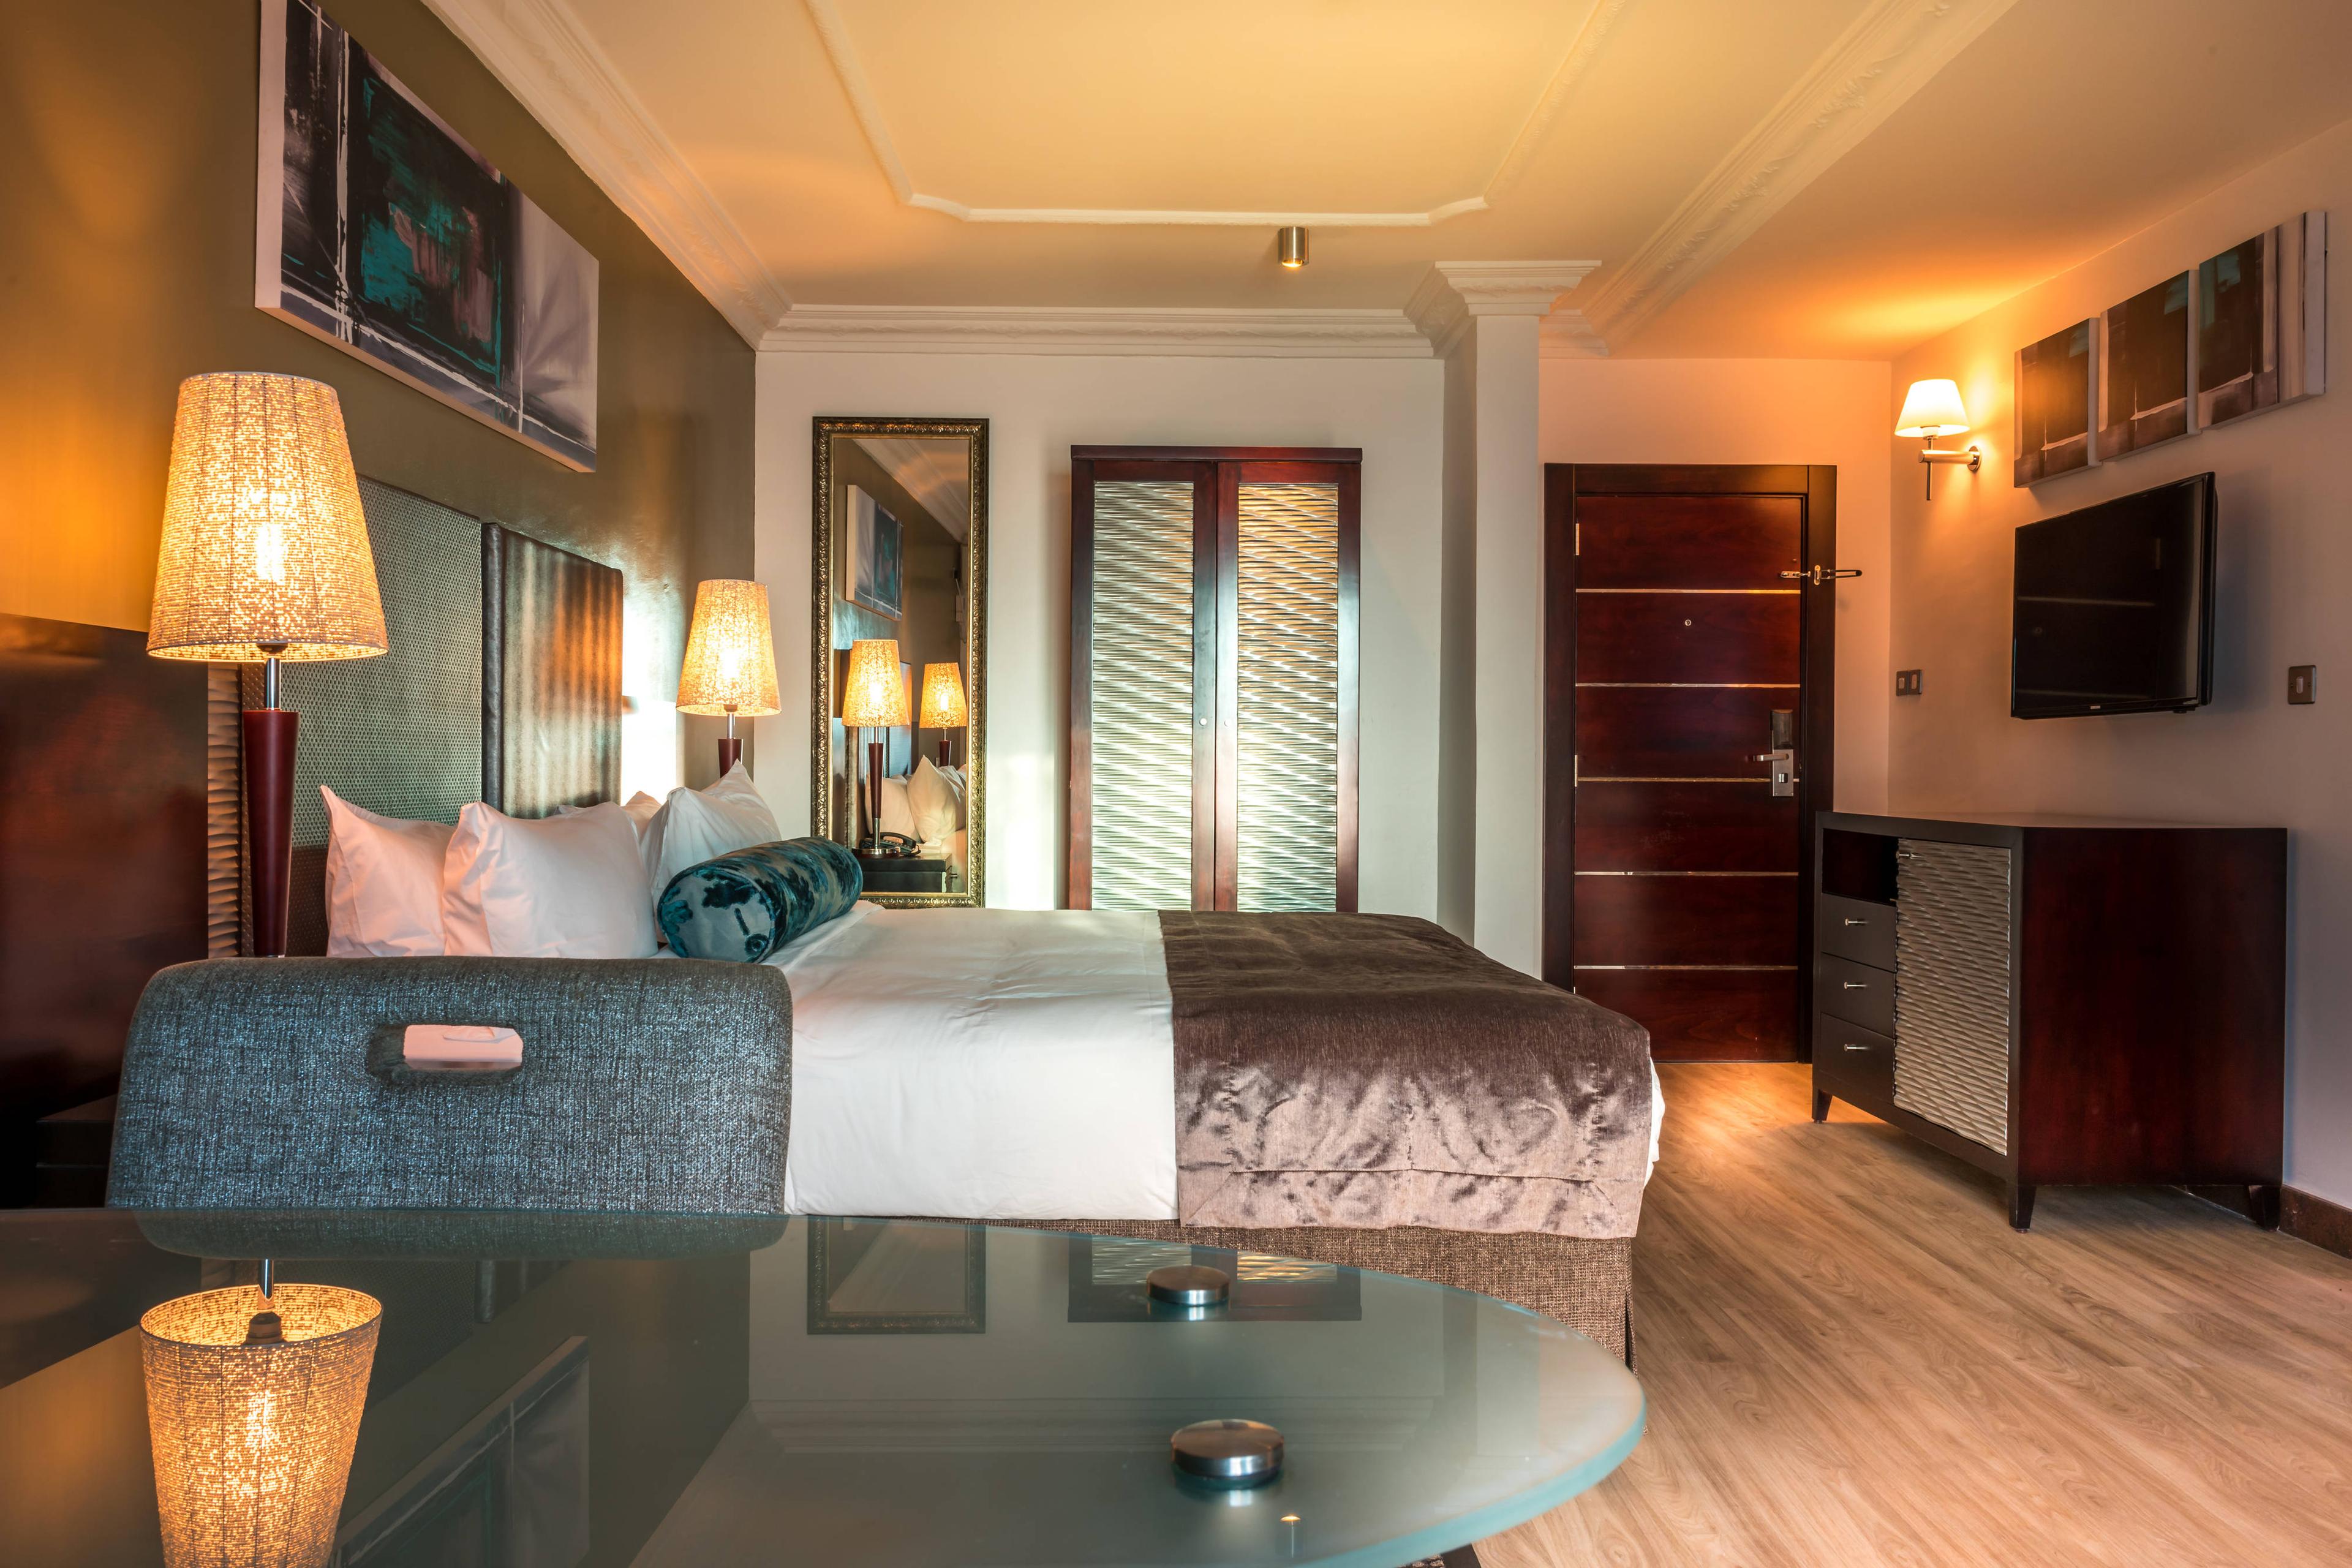 Enjoy spacious and modern finishes when staying in the Superior Guest Room.